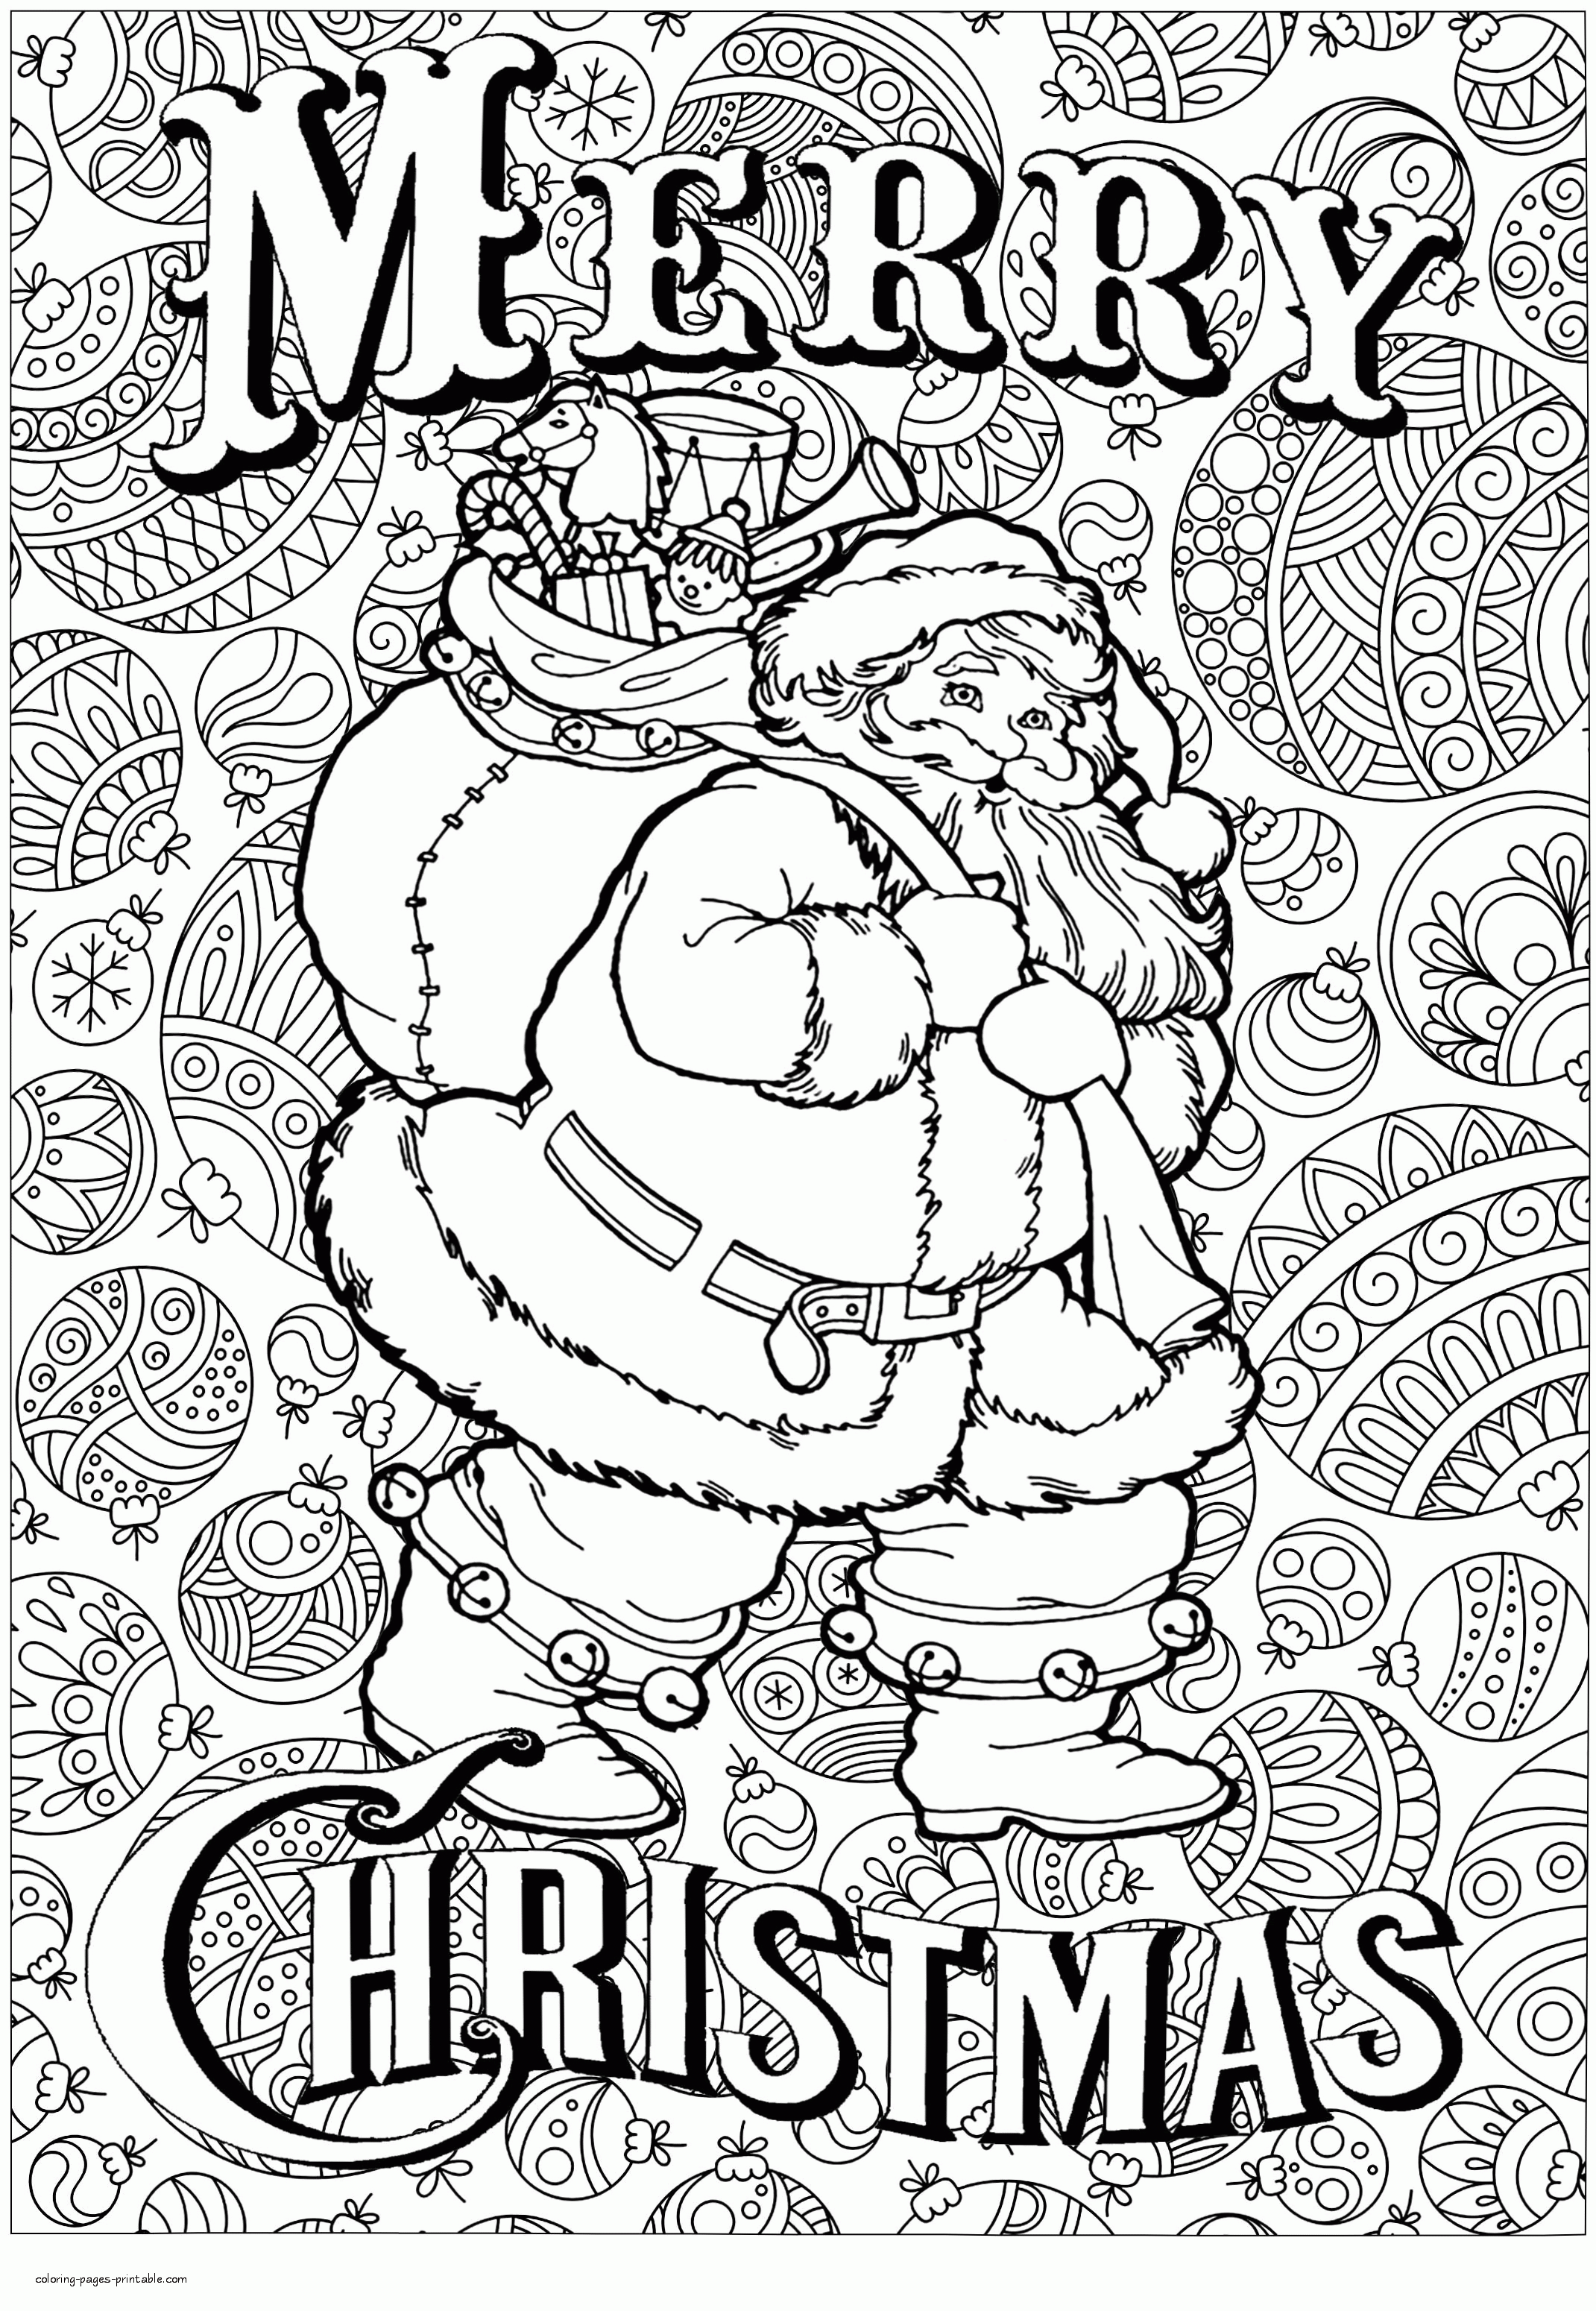 Merry Christmas Coloring Pages For Adults. Santa with a lot of gifts